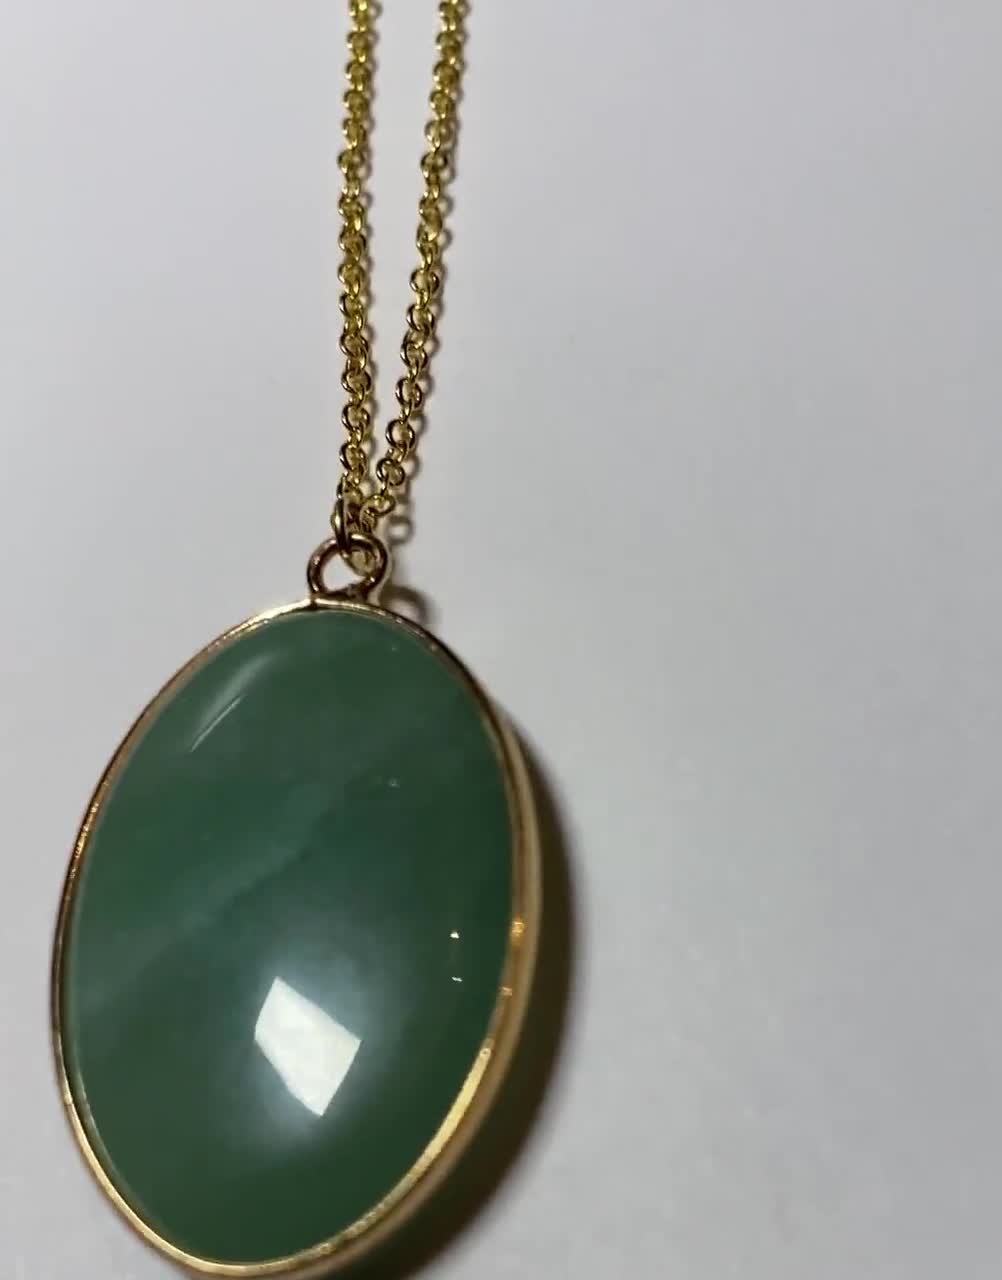 Boho NEVA Necklace in natural stones Aventurine and gold-plated pendant chic